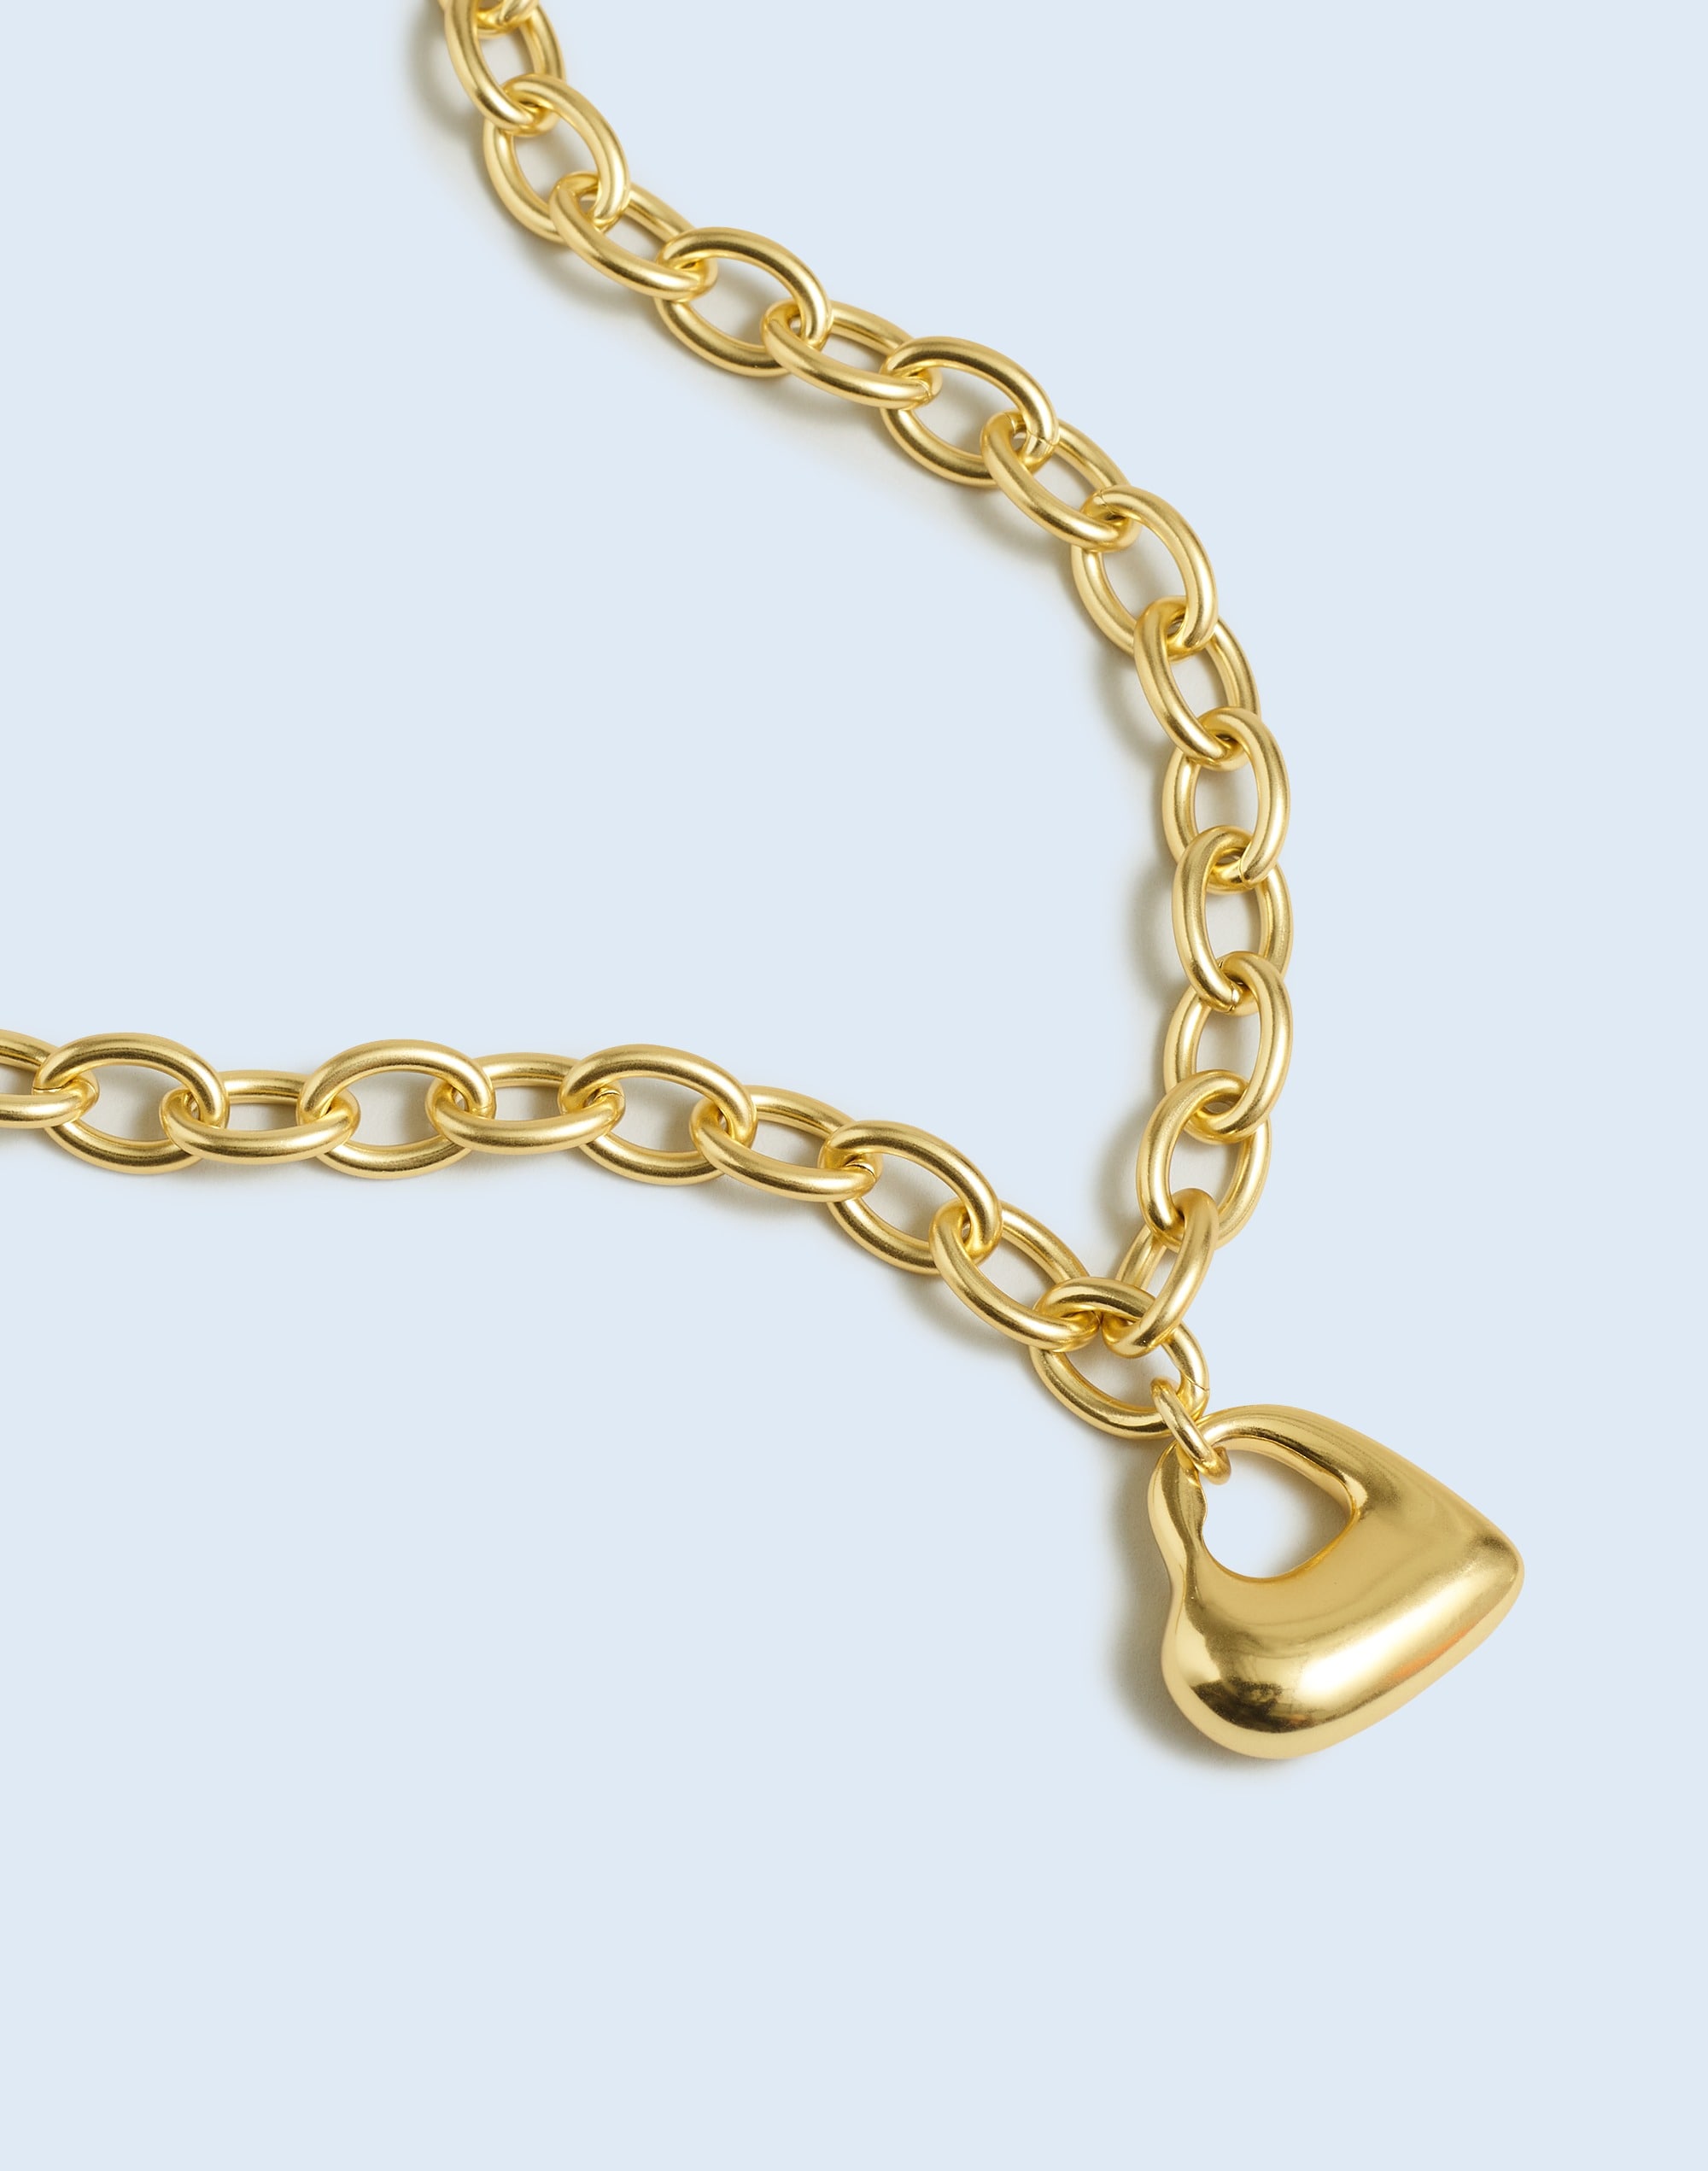 Mw Cutout Puffy Heart Choker Chain Necklace In Vintage Gold